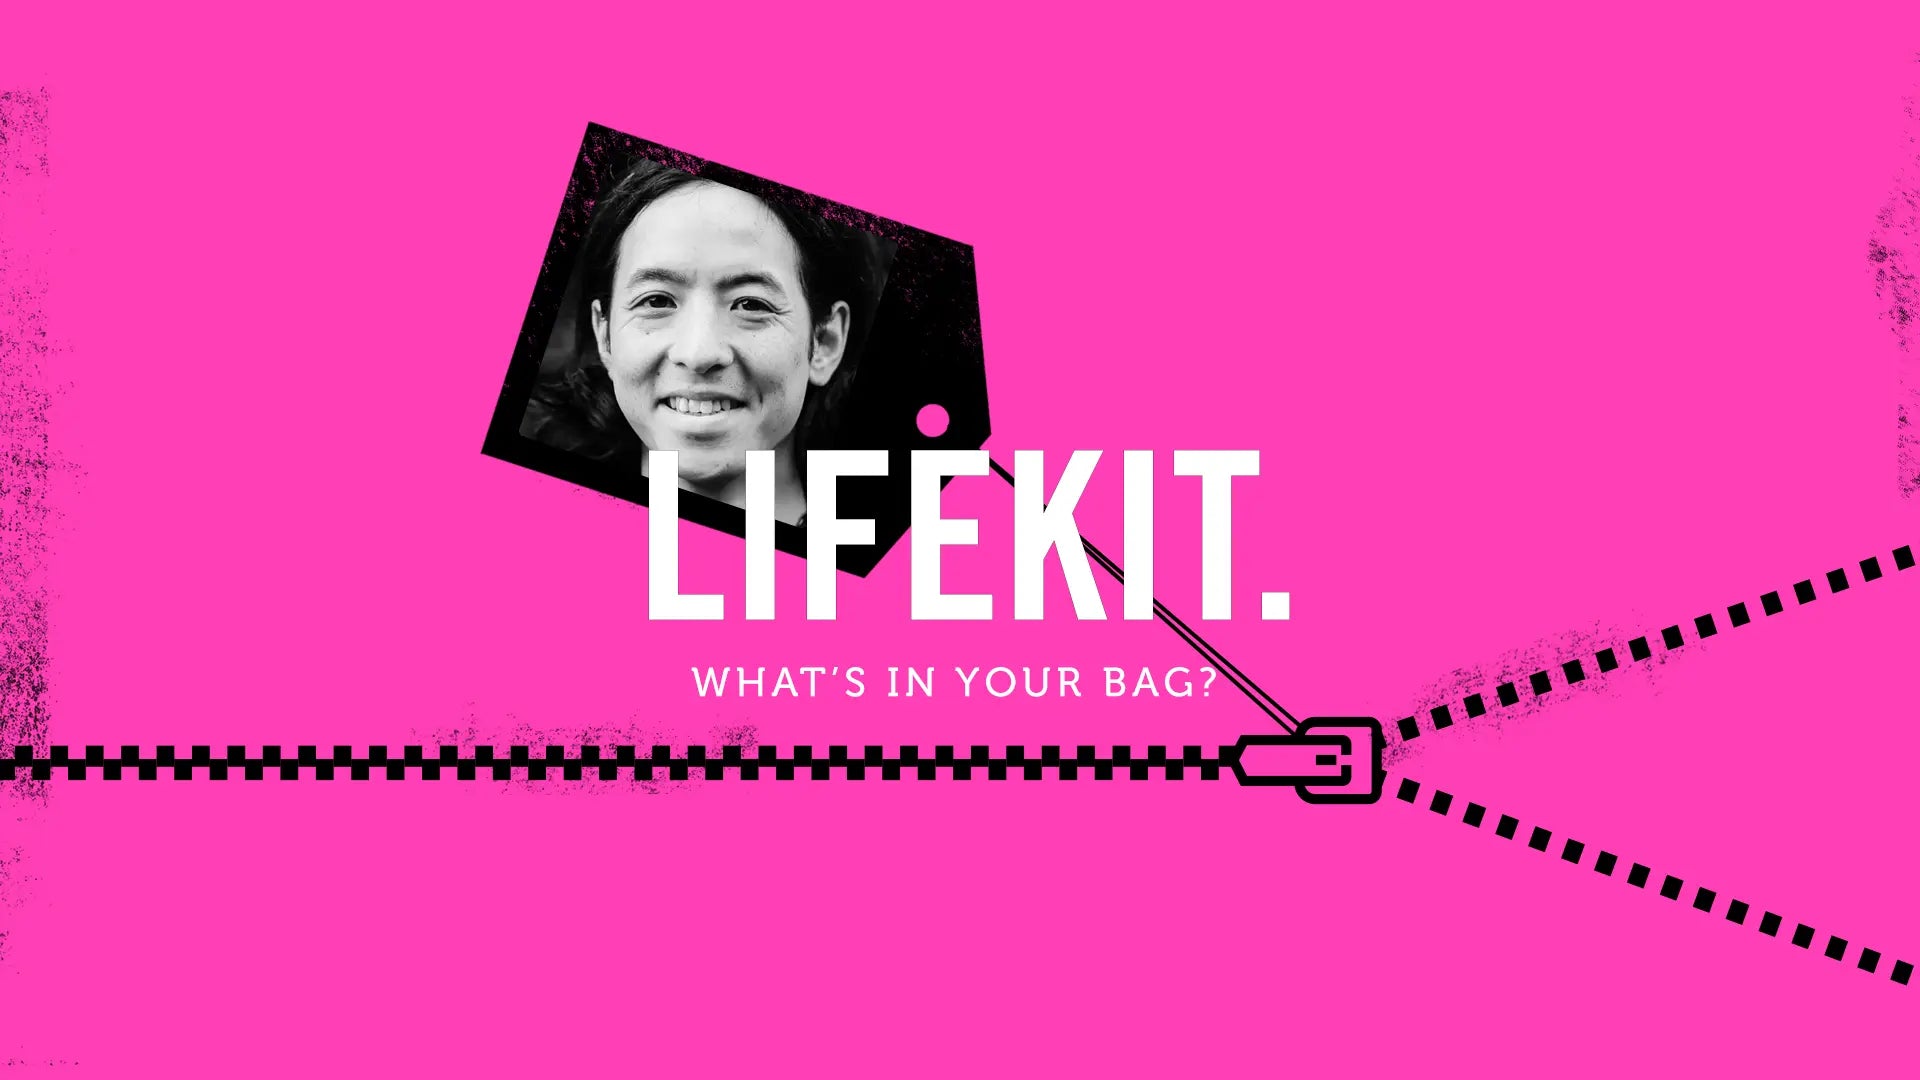 Designer and cyclist, Jun Chan, tells us what's in his bag